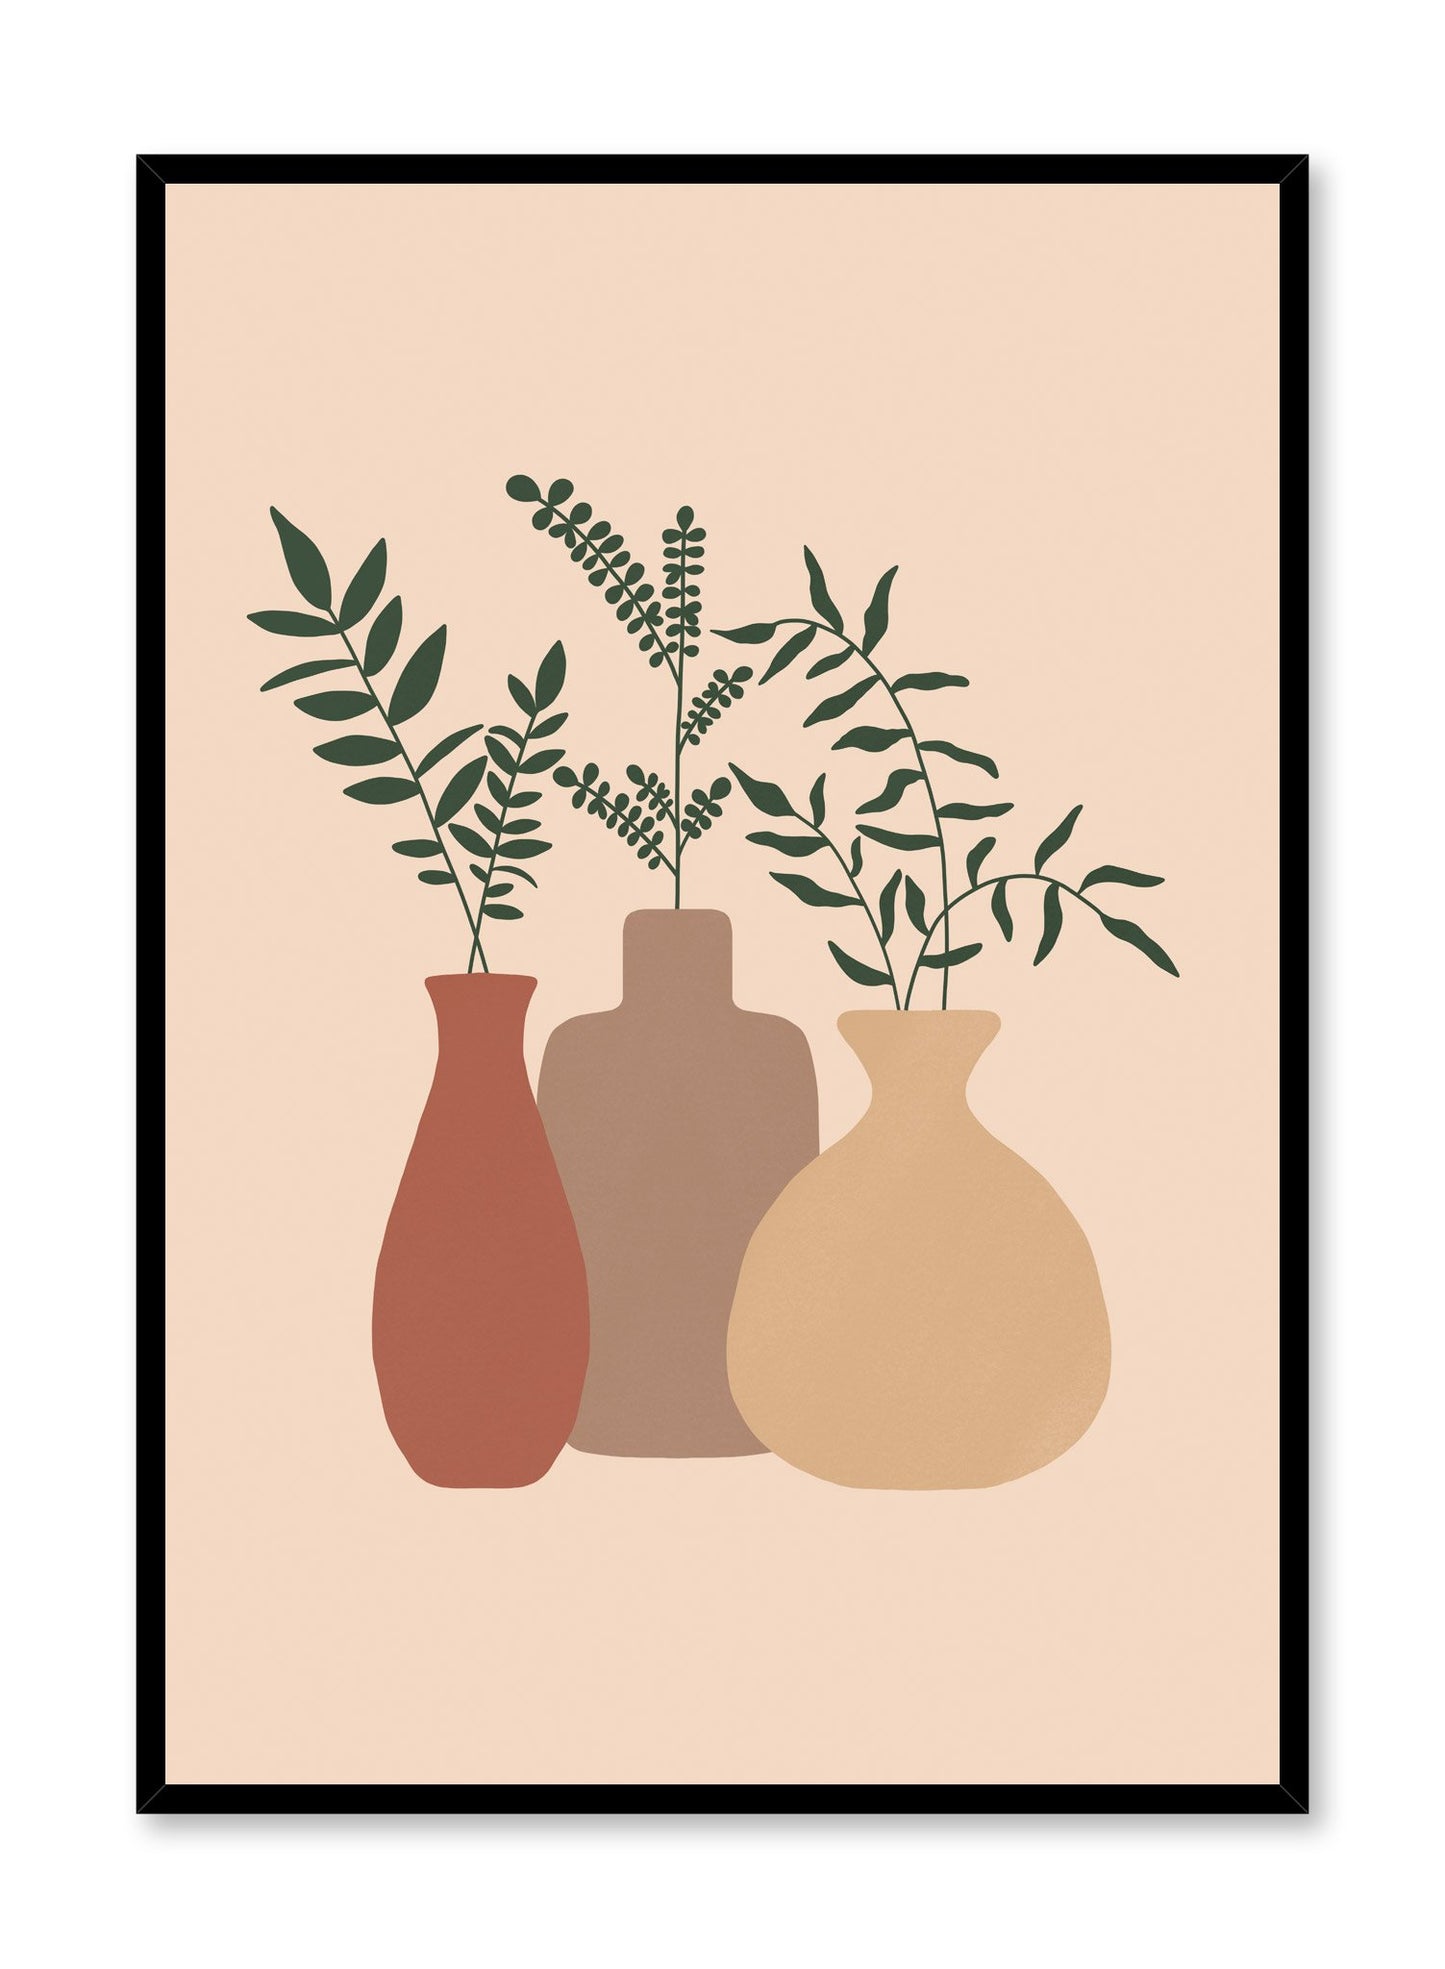 Modern minimalist poster by Opposite Wall with illustration of trio of vases